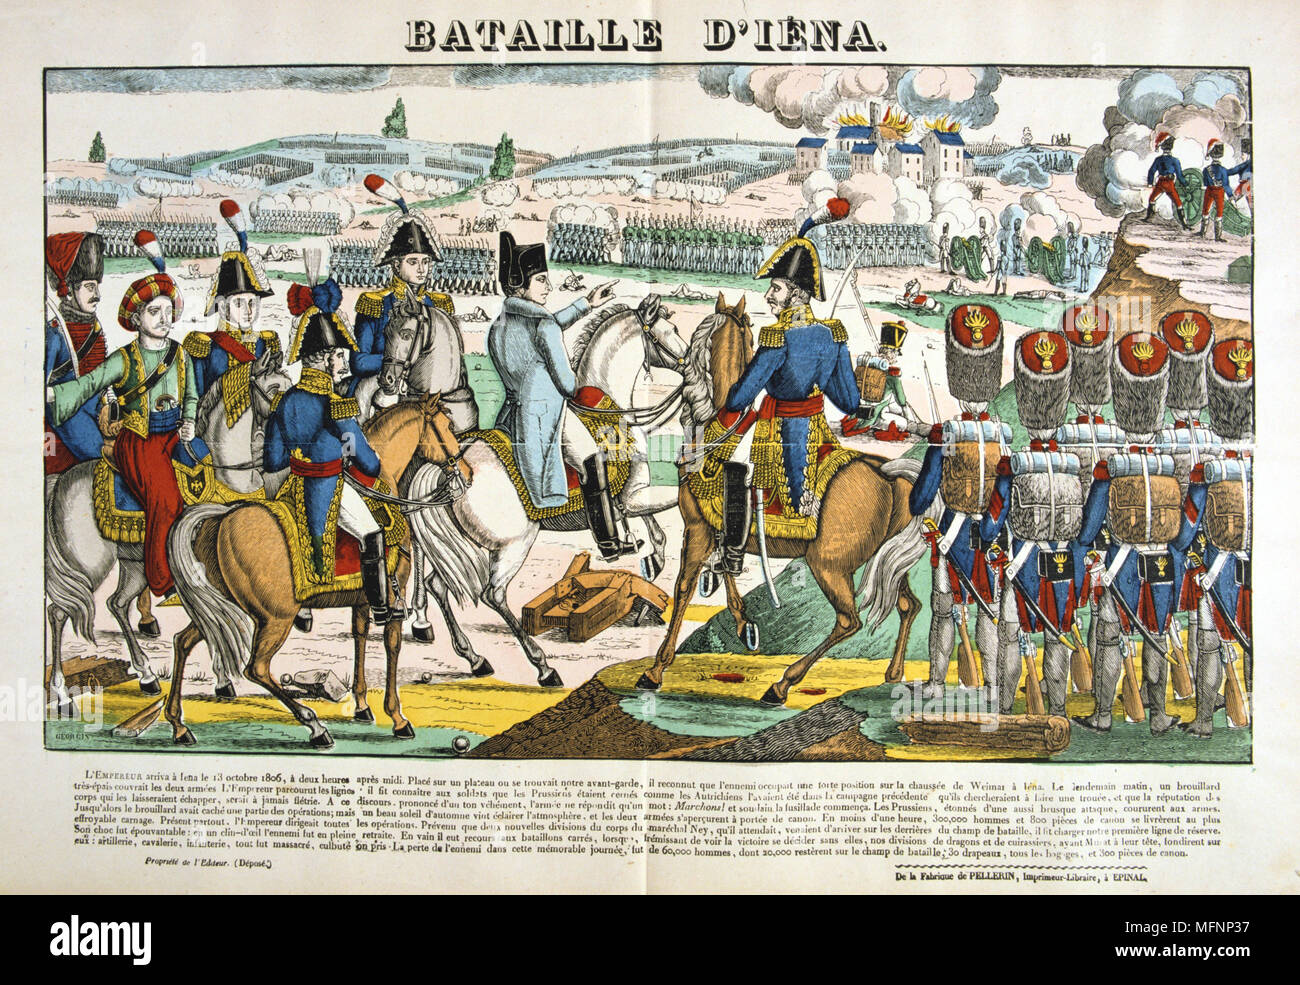 Napoleon at the Battle of Jena 14 October 1806. Decisive French victory under Napoleon against Prussia and Saxony under Duke of Brunswick, Prince of Hohenlohe and General Blucher.  Popular French hand-coloured woodcut. Stock Photo